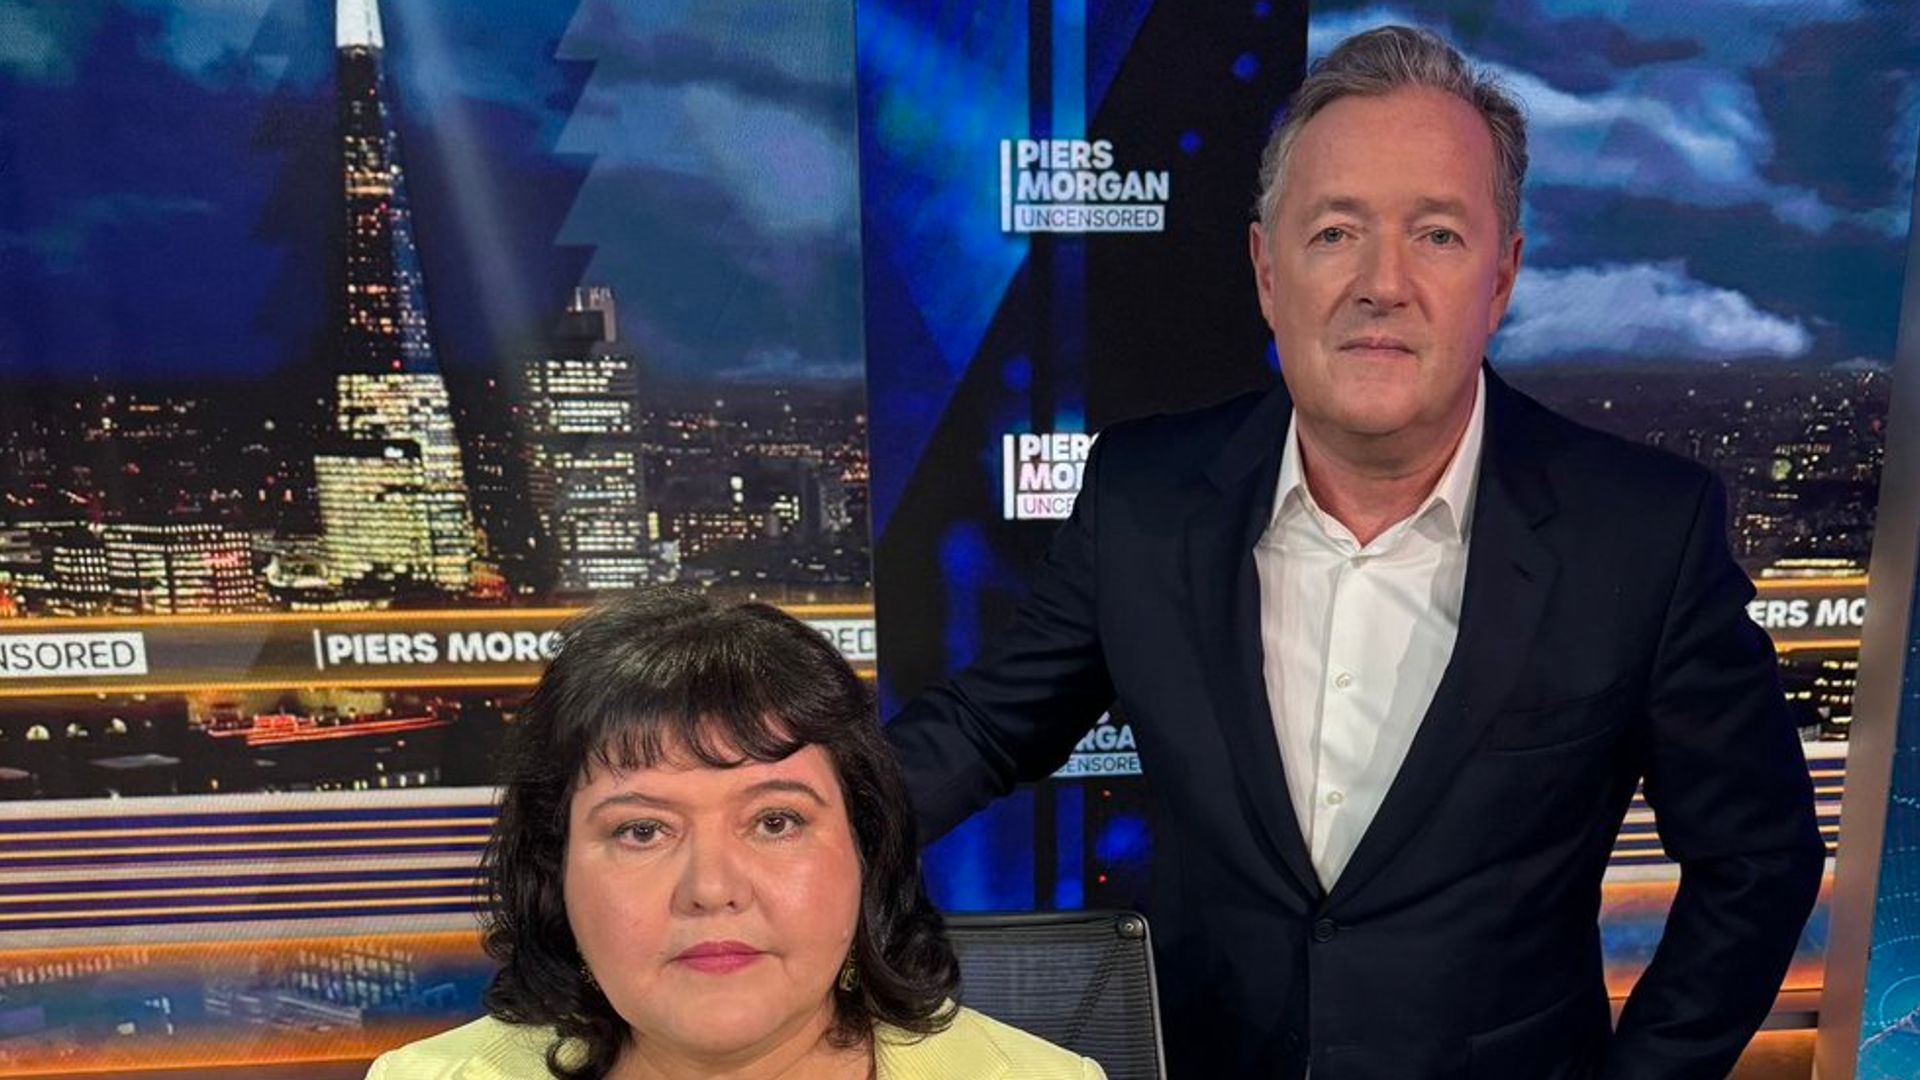 Piers Morgan next to Fiona Harvey, who is sitting in a chair